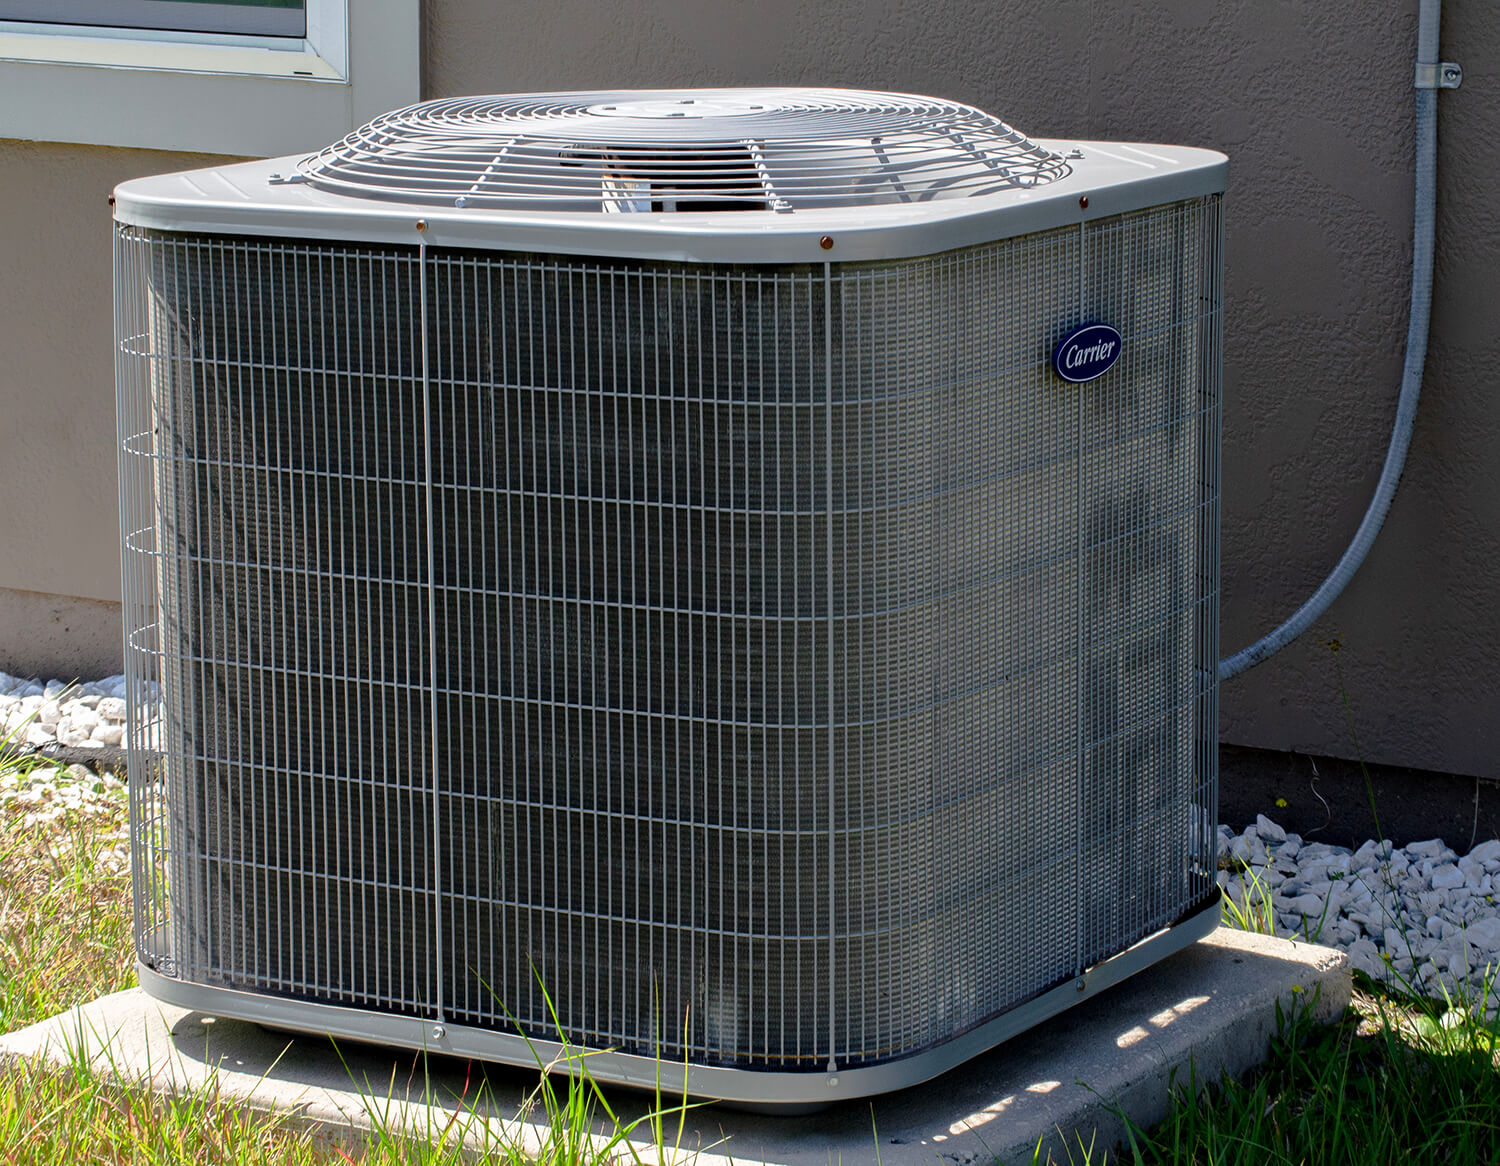 The new ductless HVAC comes with a 3 year warranty on parts